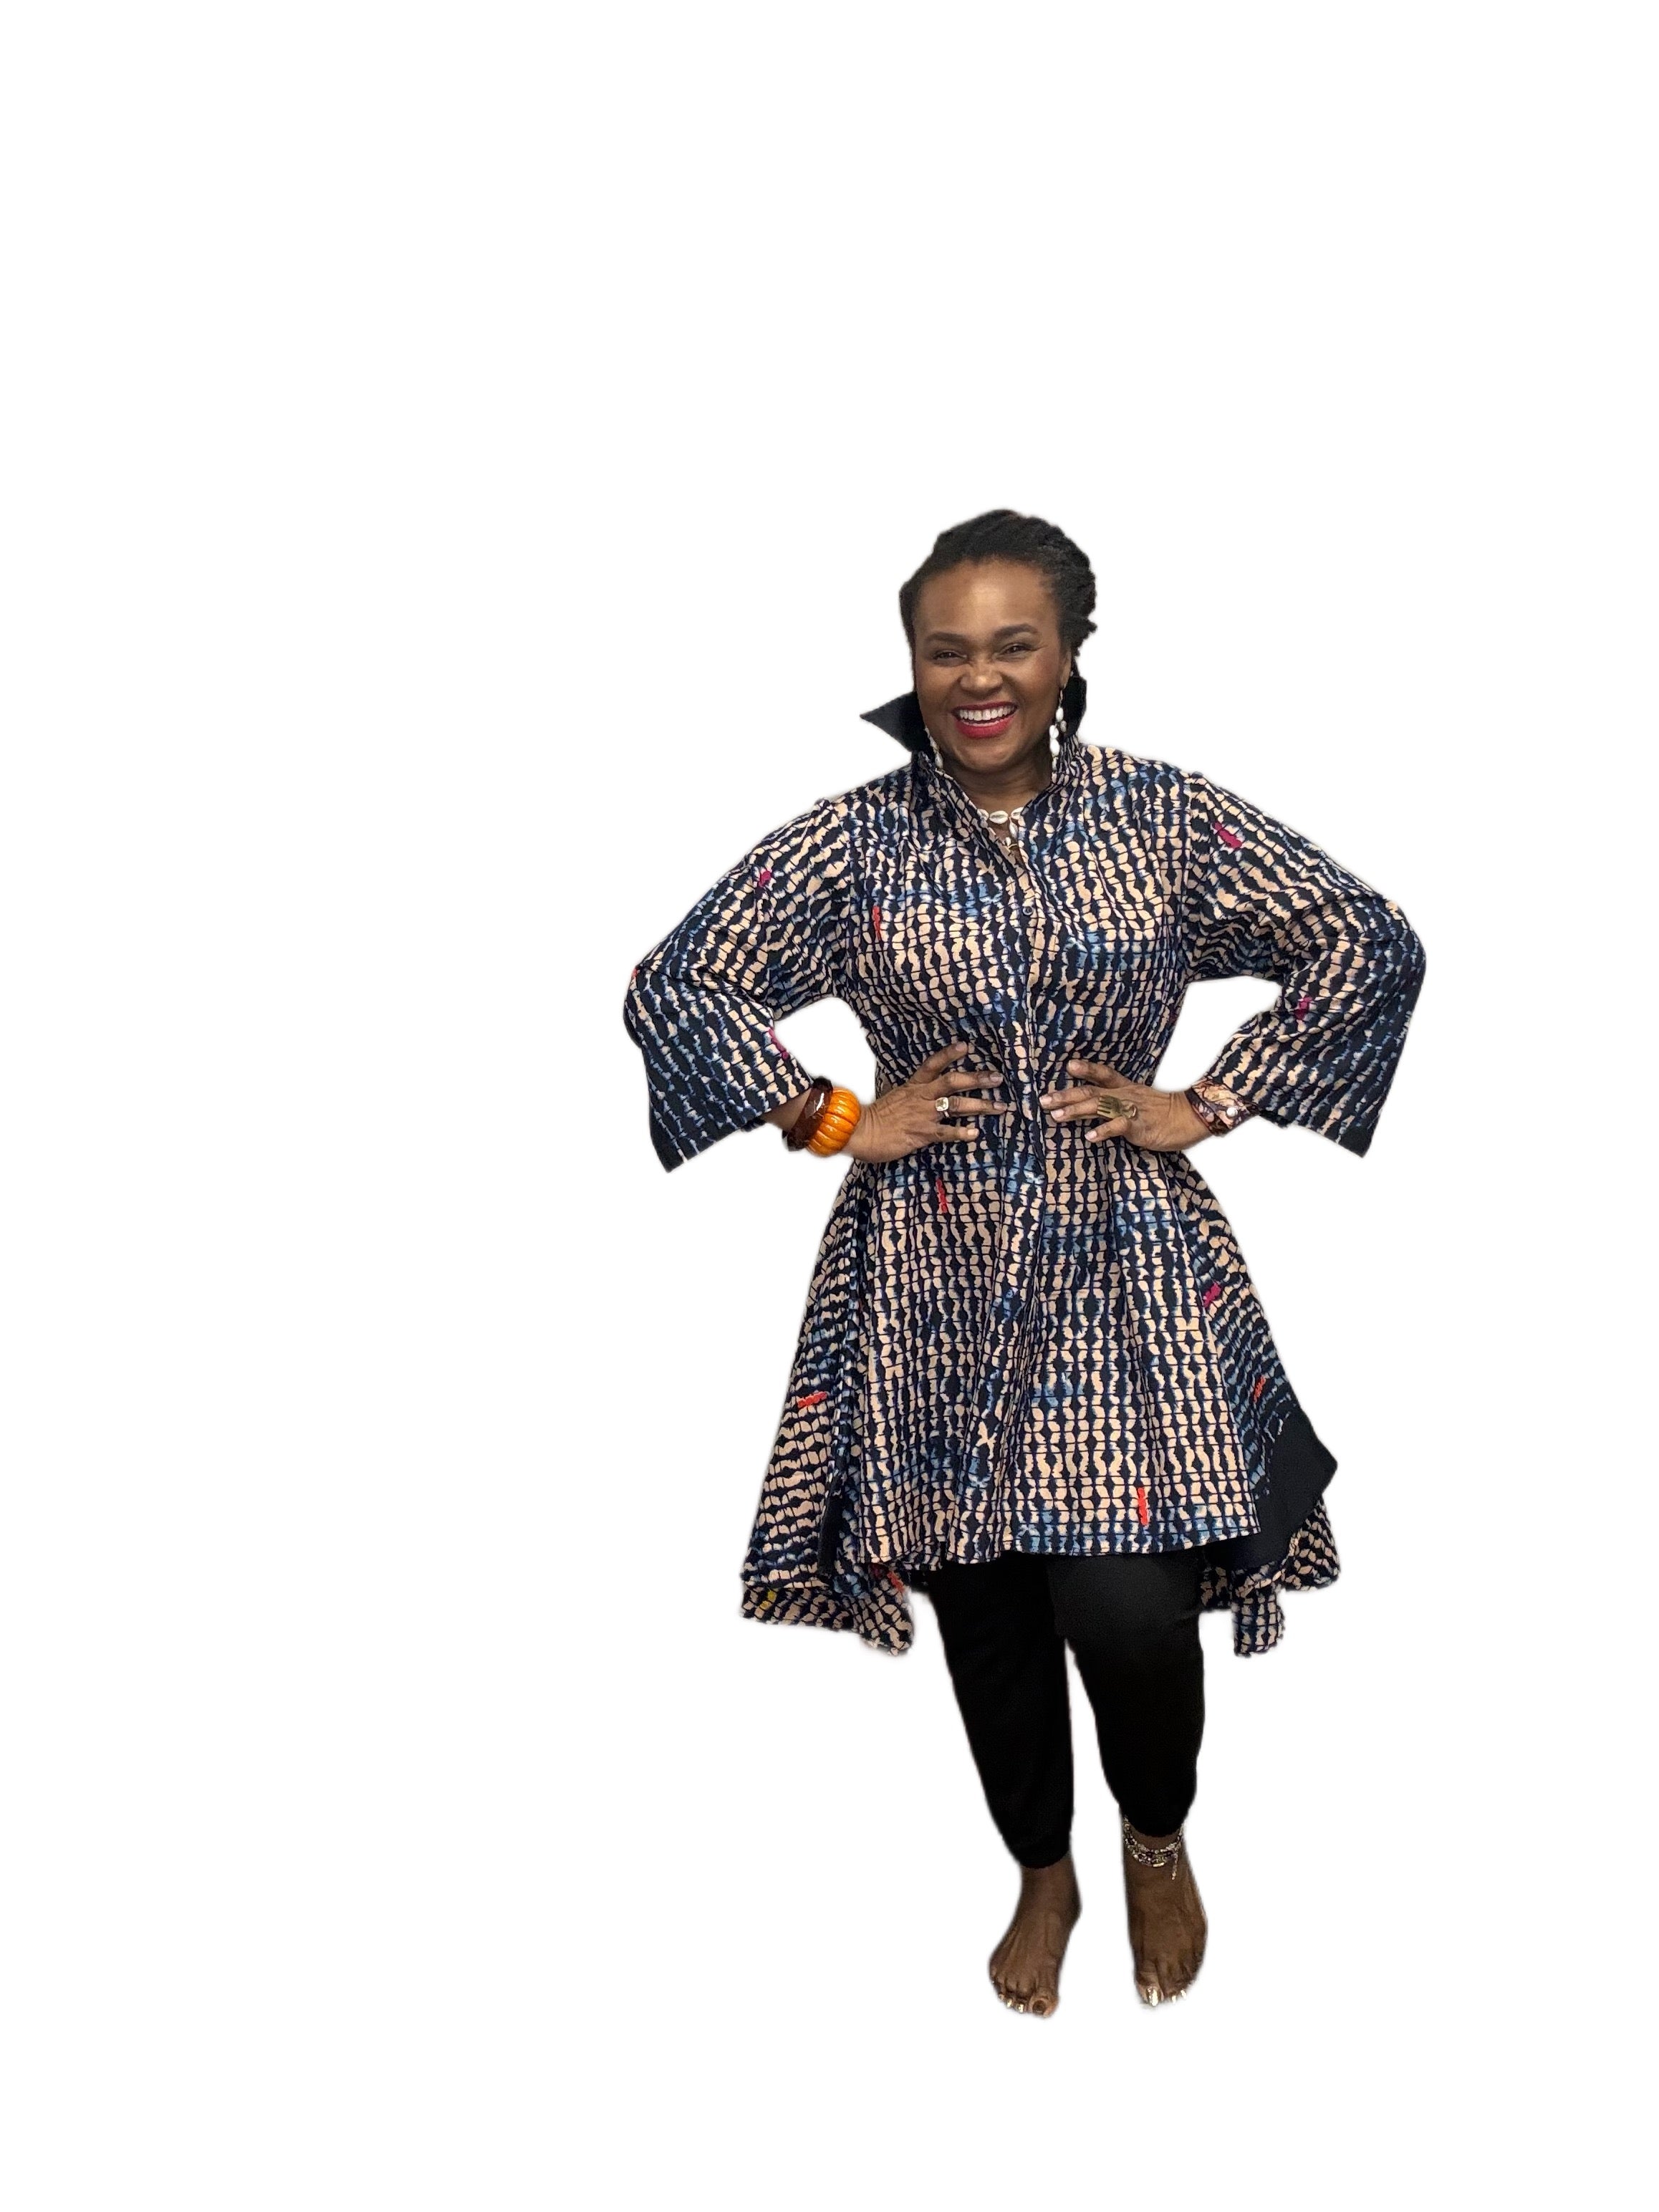 2 Piece Print Tunic With Pockets and Head Wrap